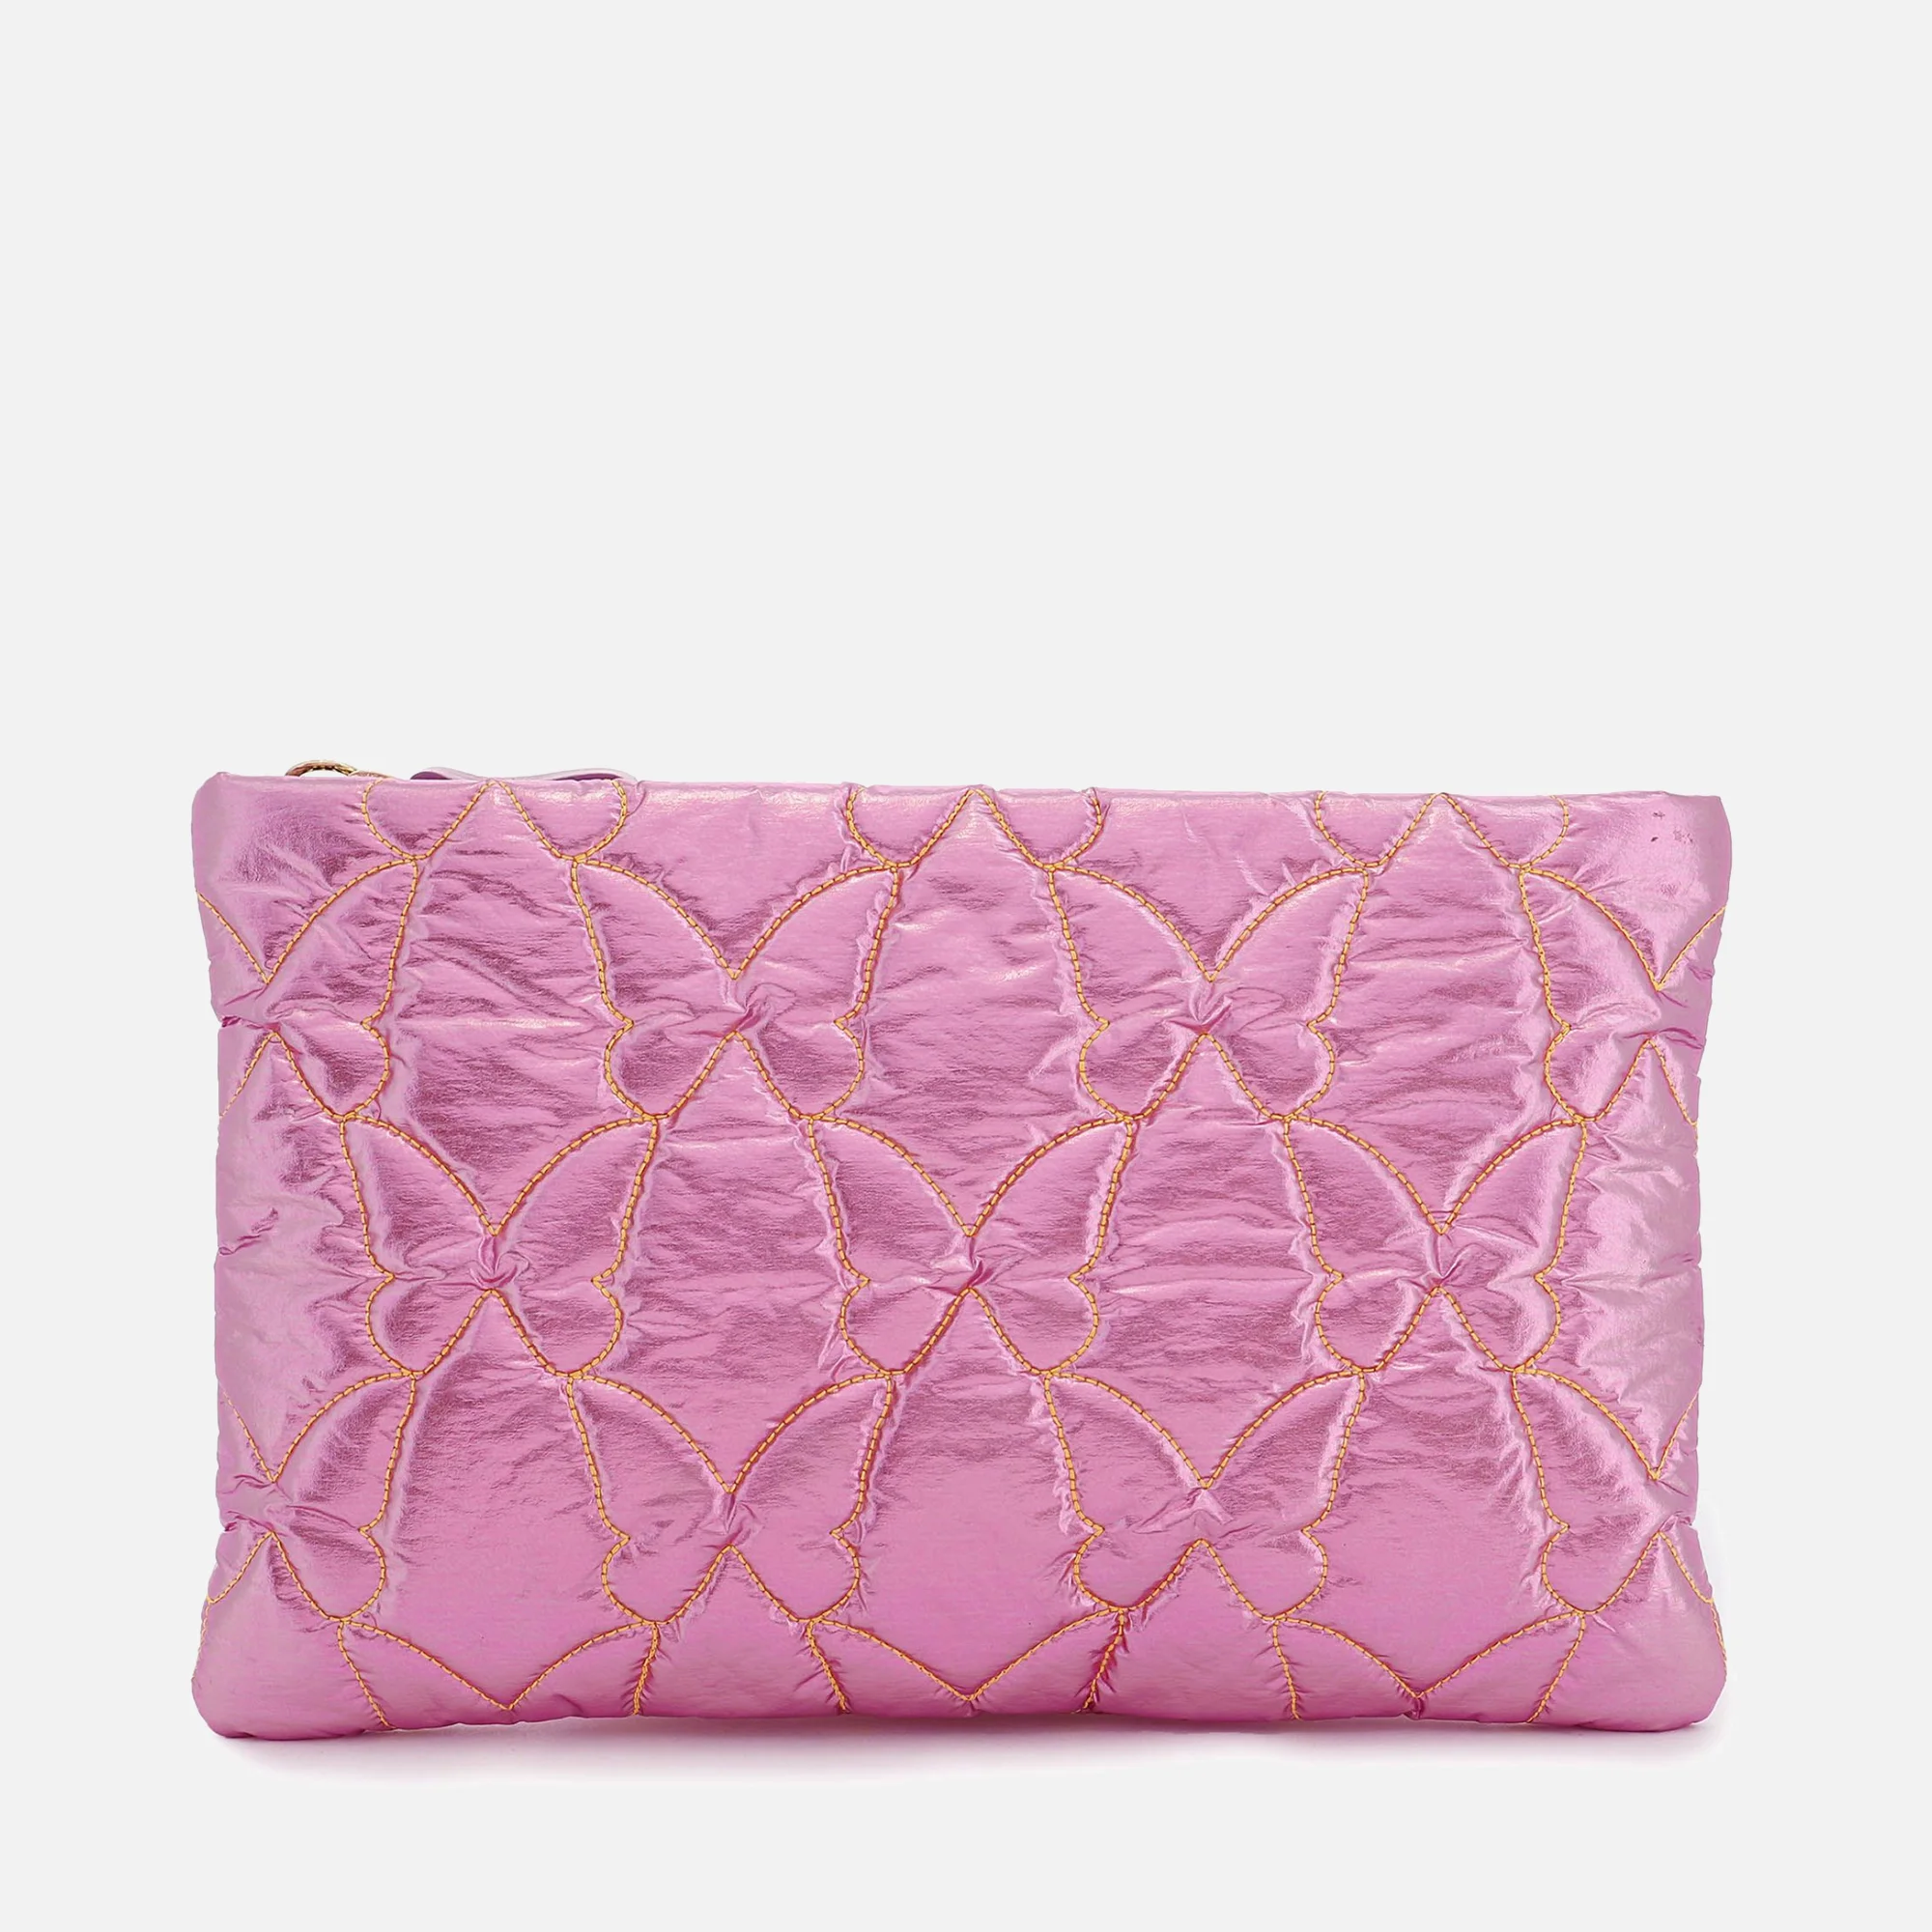 Sophia Webster Gia Butterfly Stitch Textile Clutch Bag Image 1